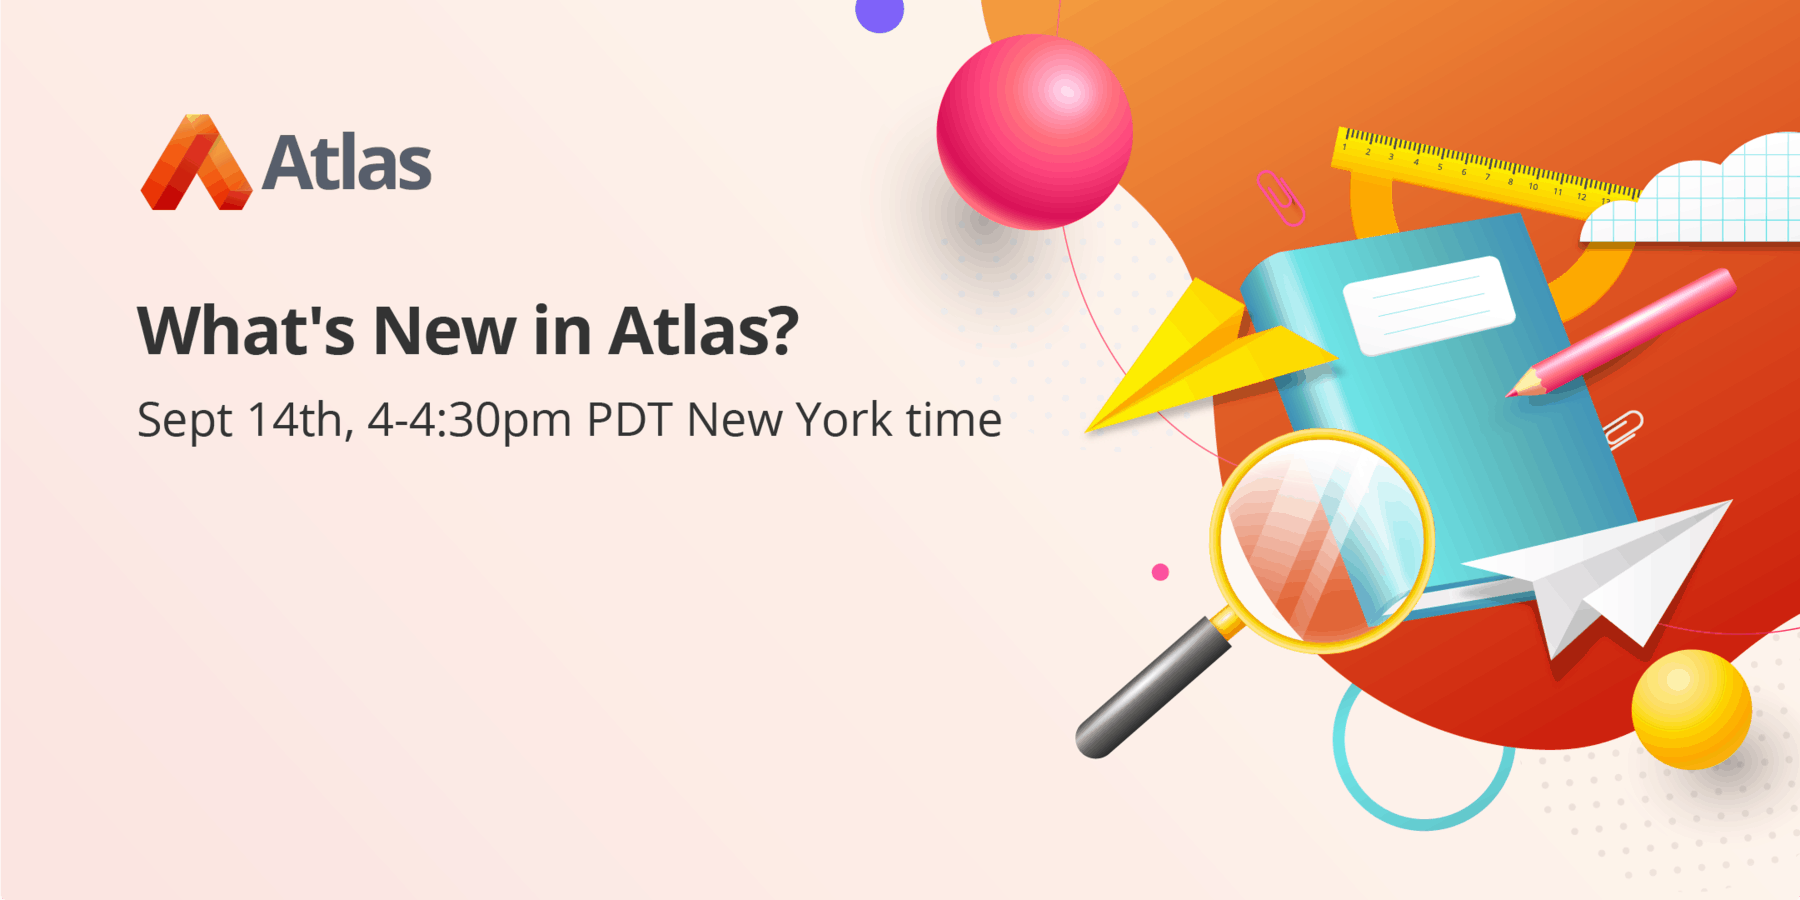 What's New in Atlas?